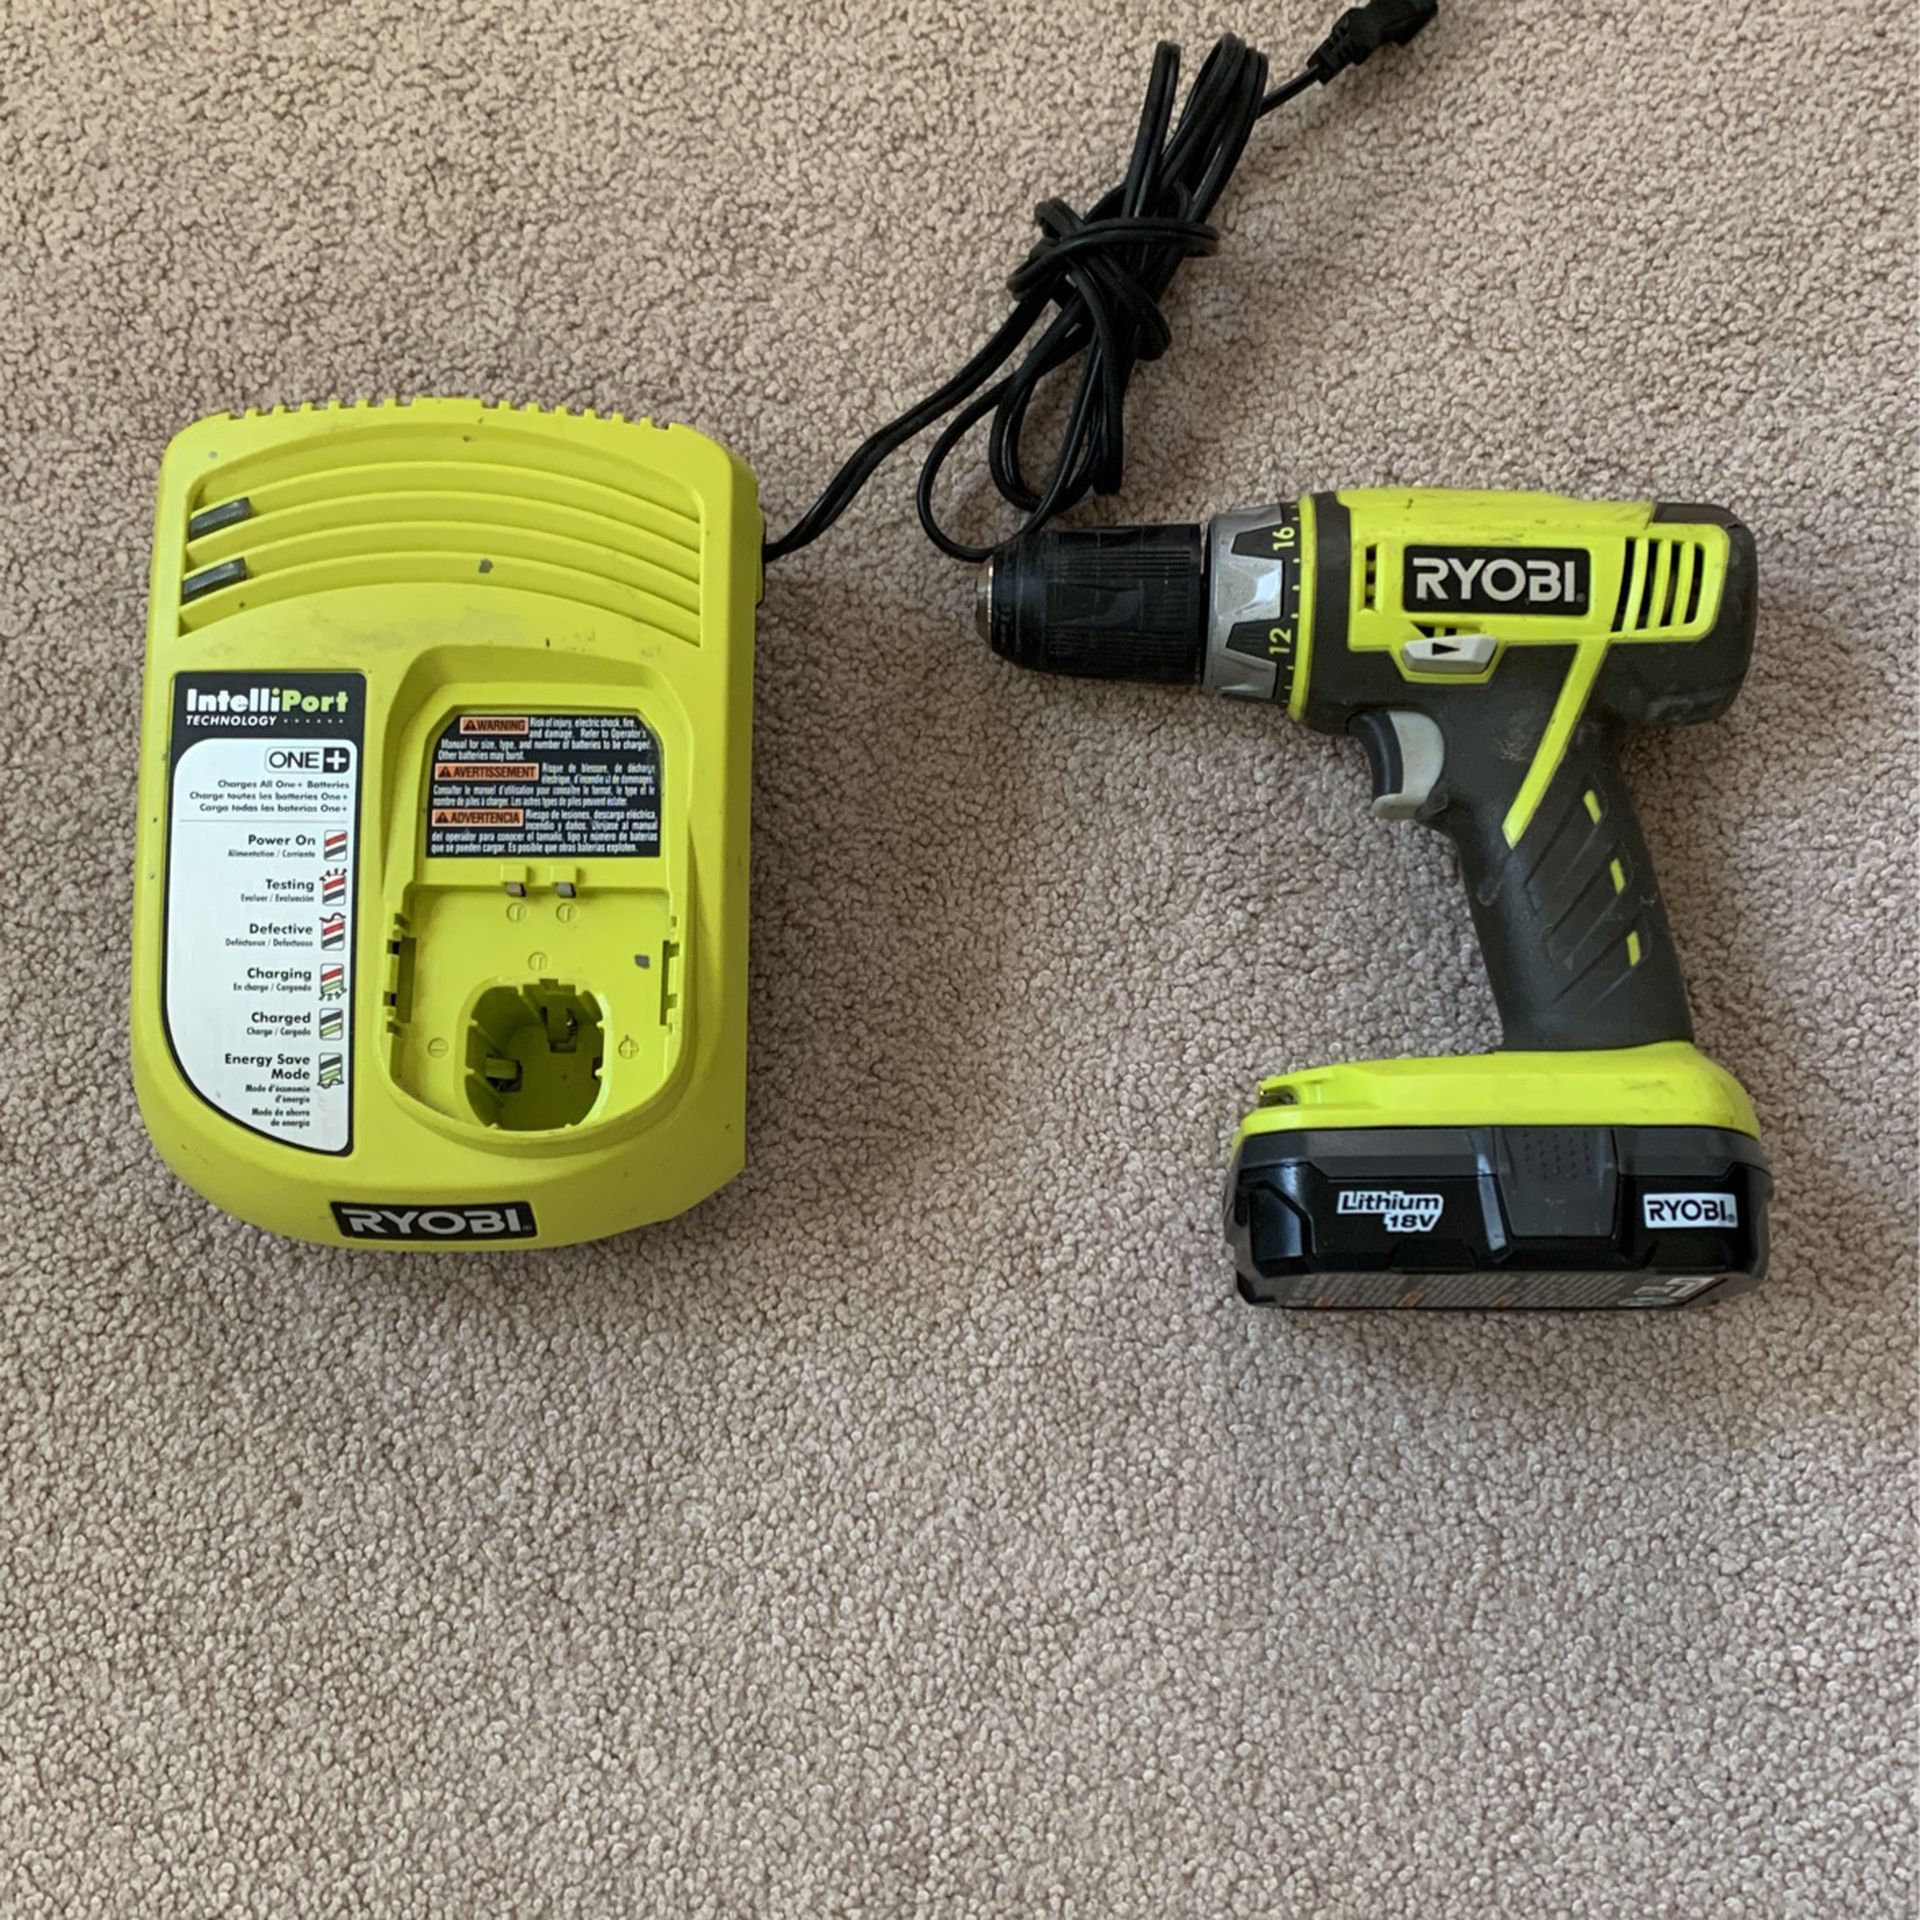 Ryobi Cordless Drill Battery And Charger